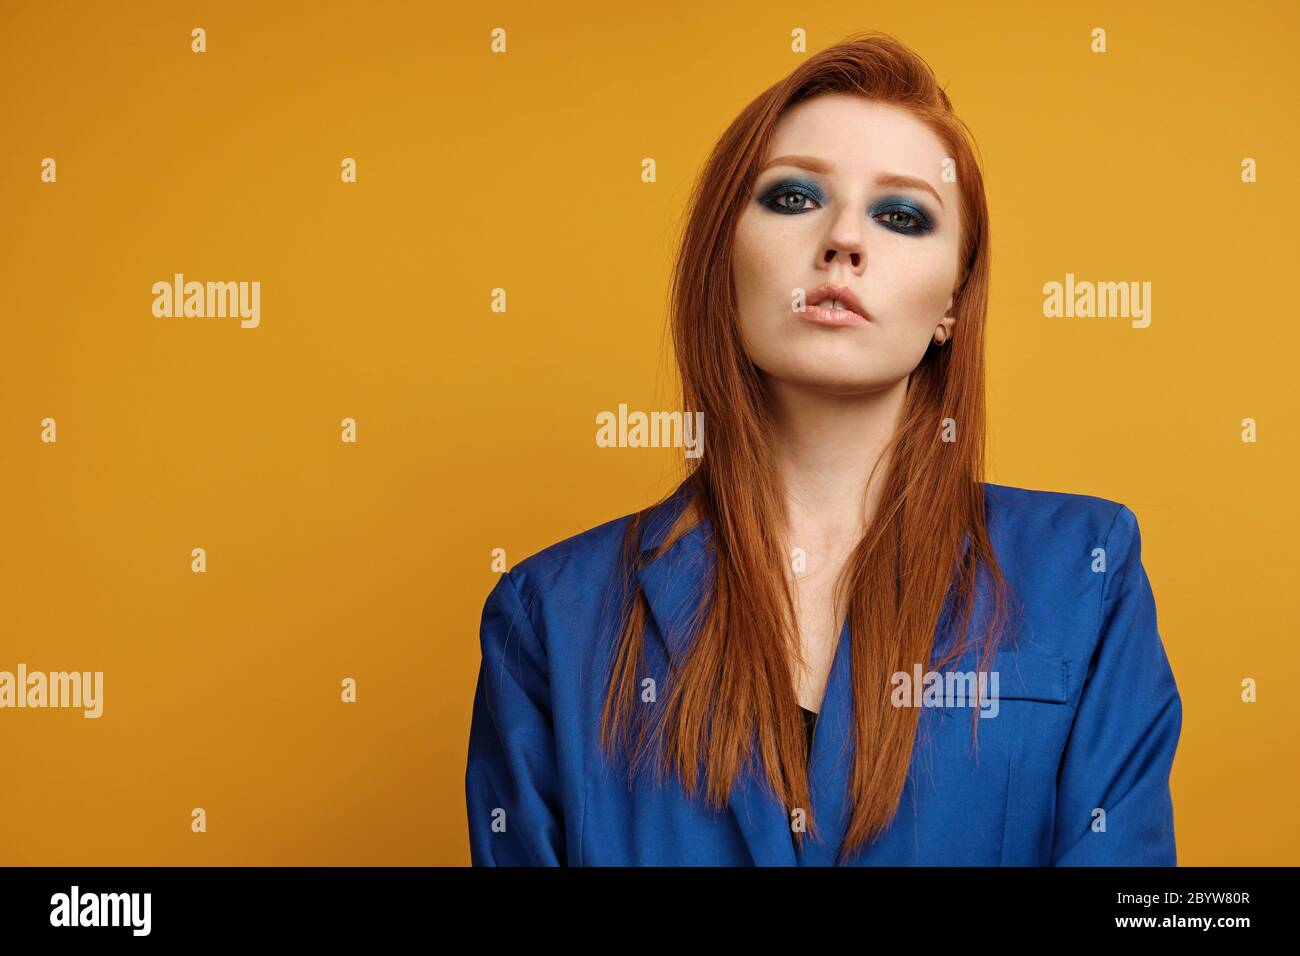 Headshot. Red-haired girl in a blue jacket and with blue eye make-up stands on a yellow background and looks in the frame Stock Photo